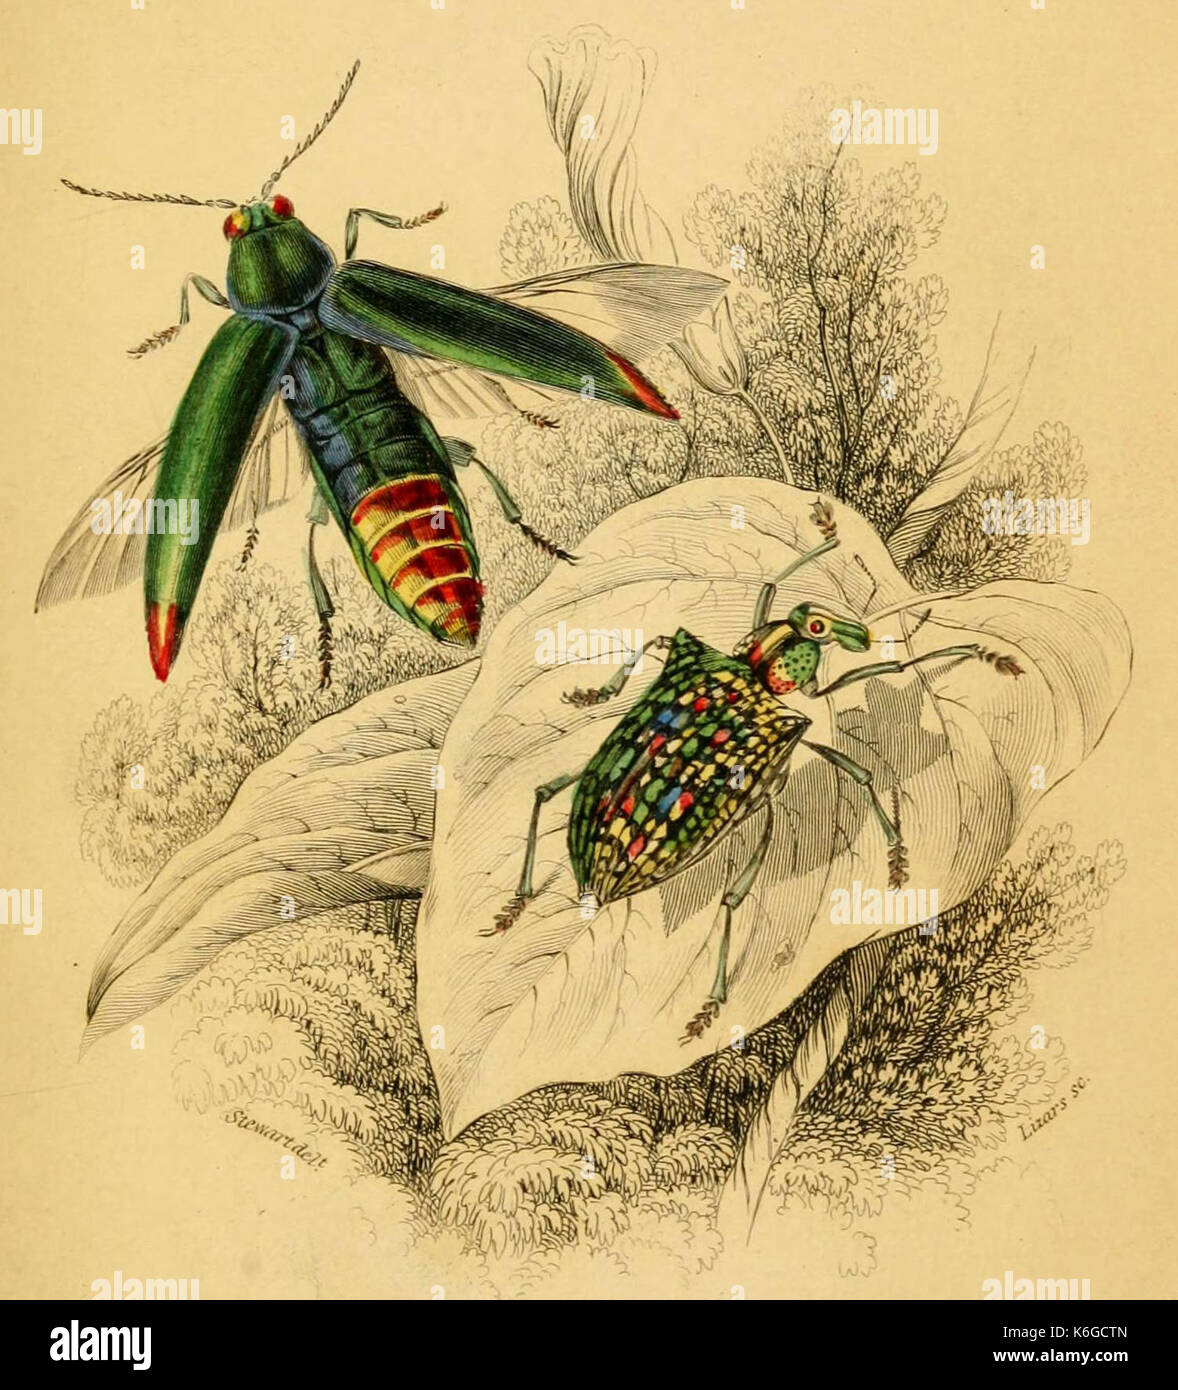 Buprestis fulminans and Curculio splendens   The natural history of beetles Stock Photo